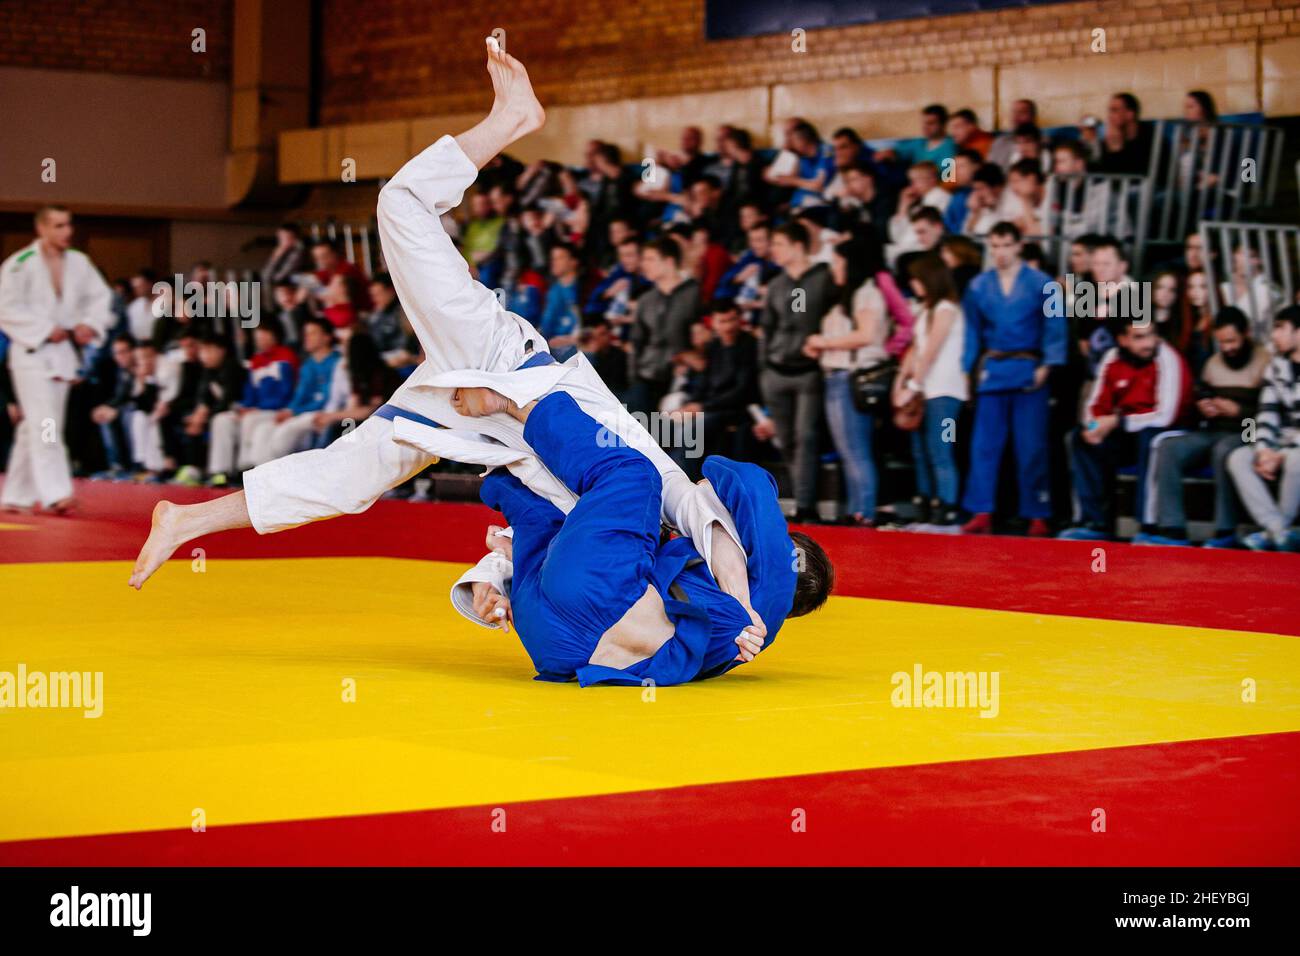 throw judo fighter in competition judo Stock Photo